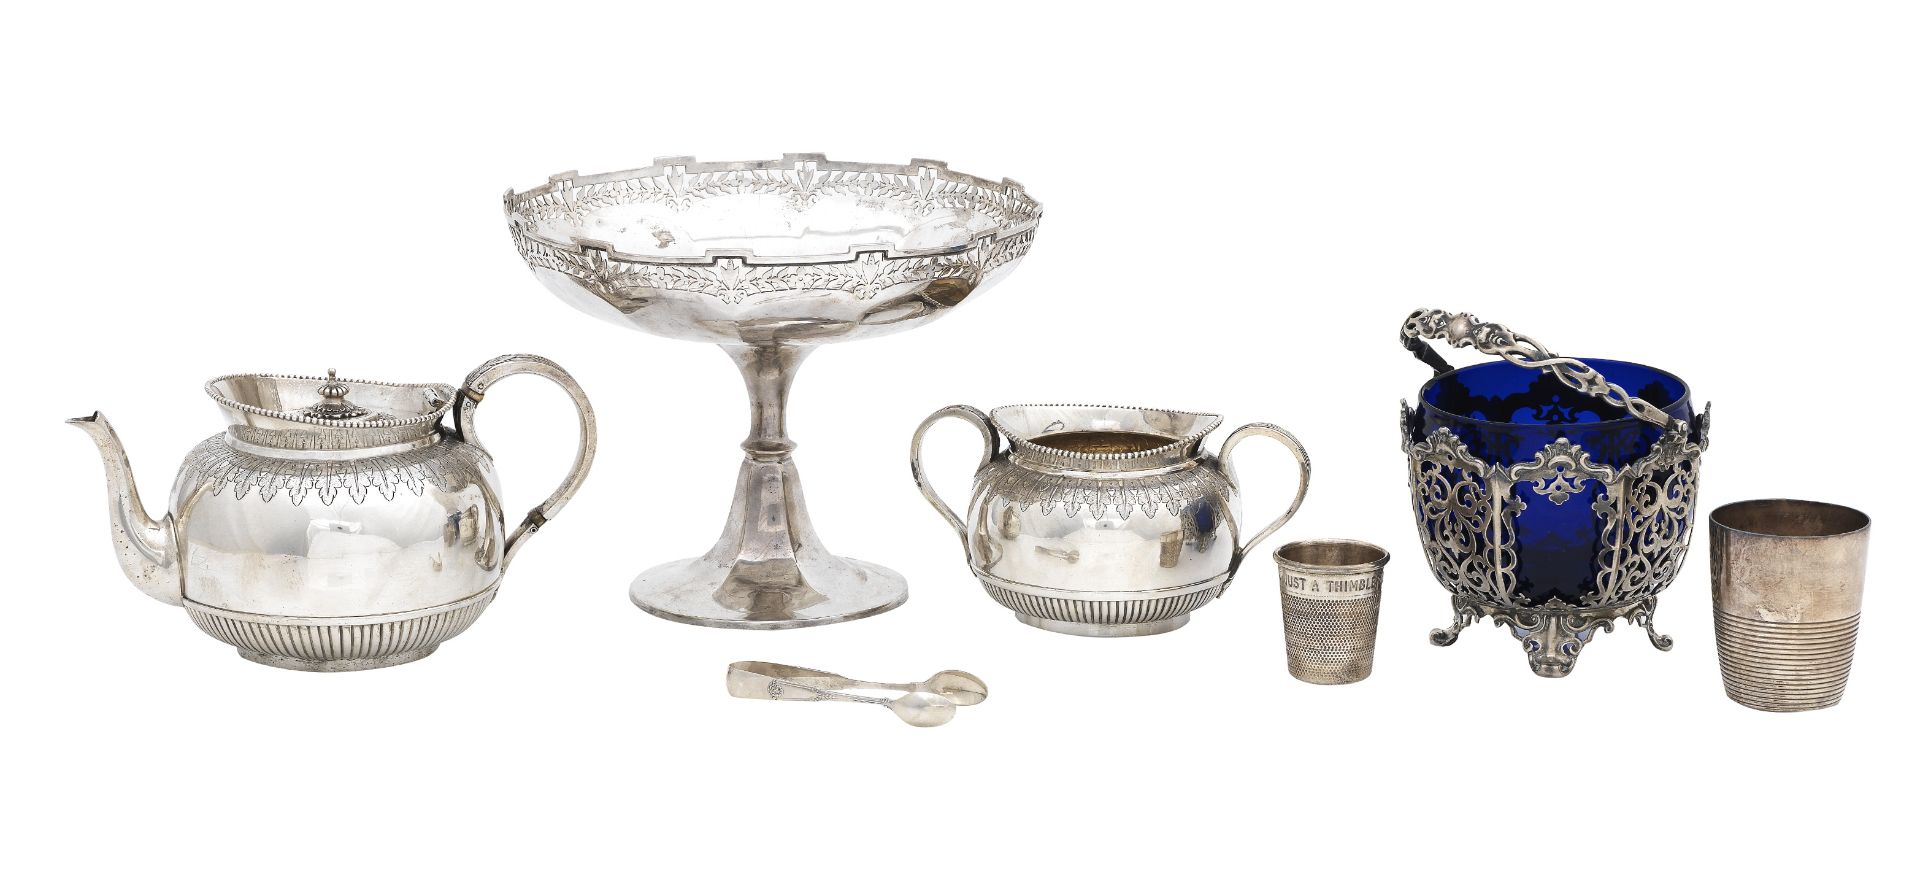 A collection of silver to include a teapot, a sugar bowl, a comport, a basket, an over-sized thim...